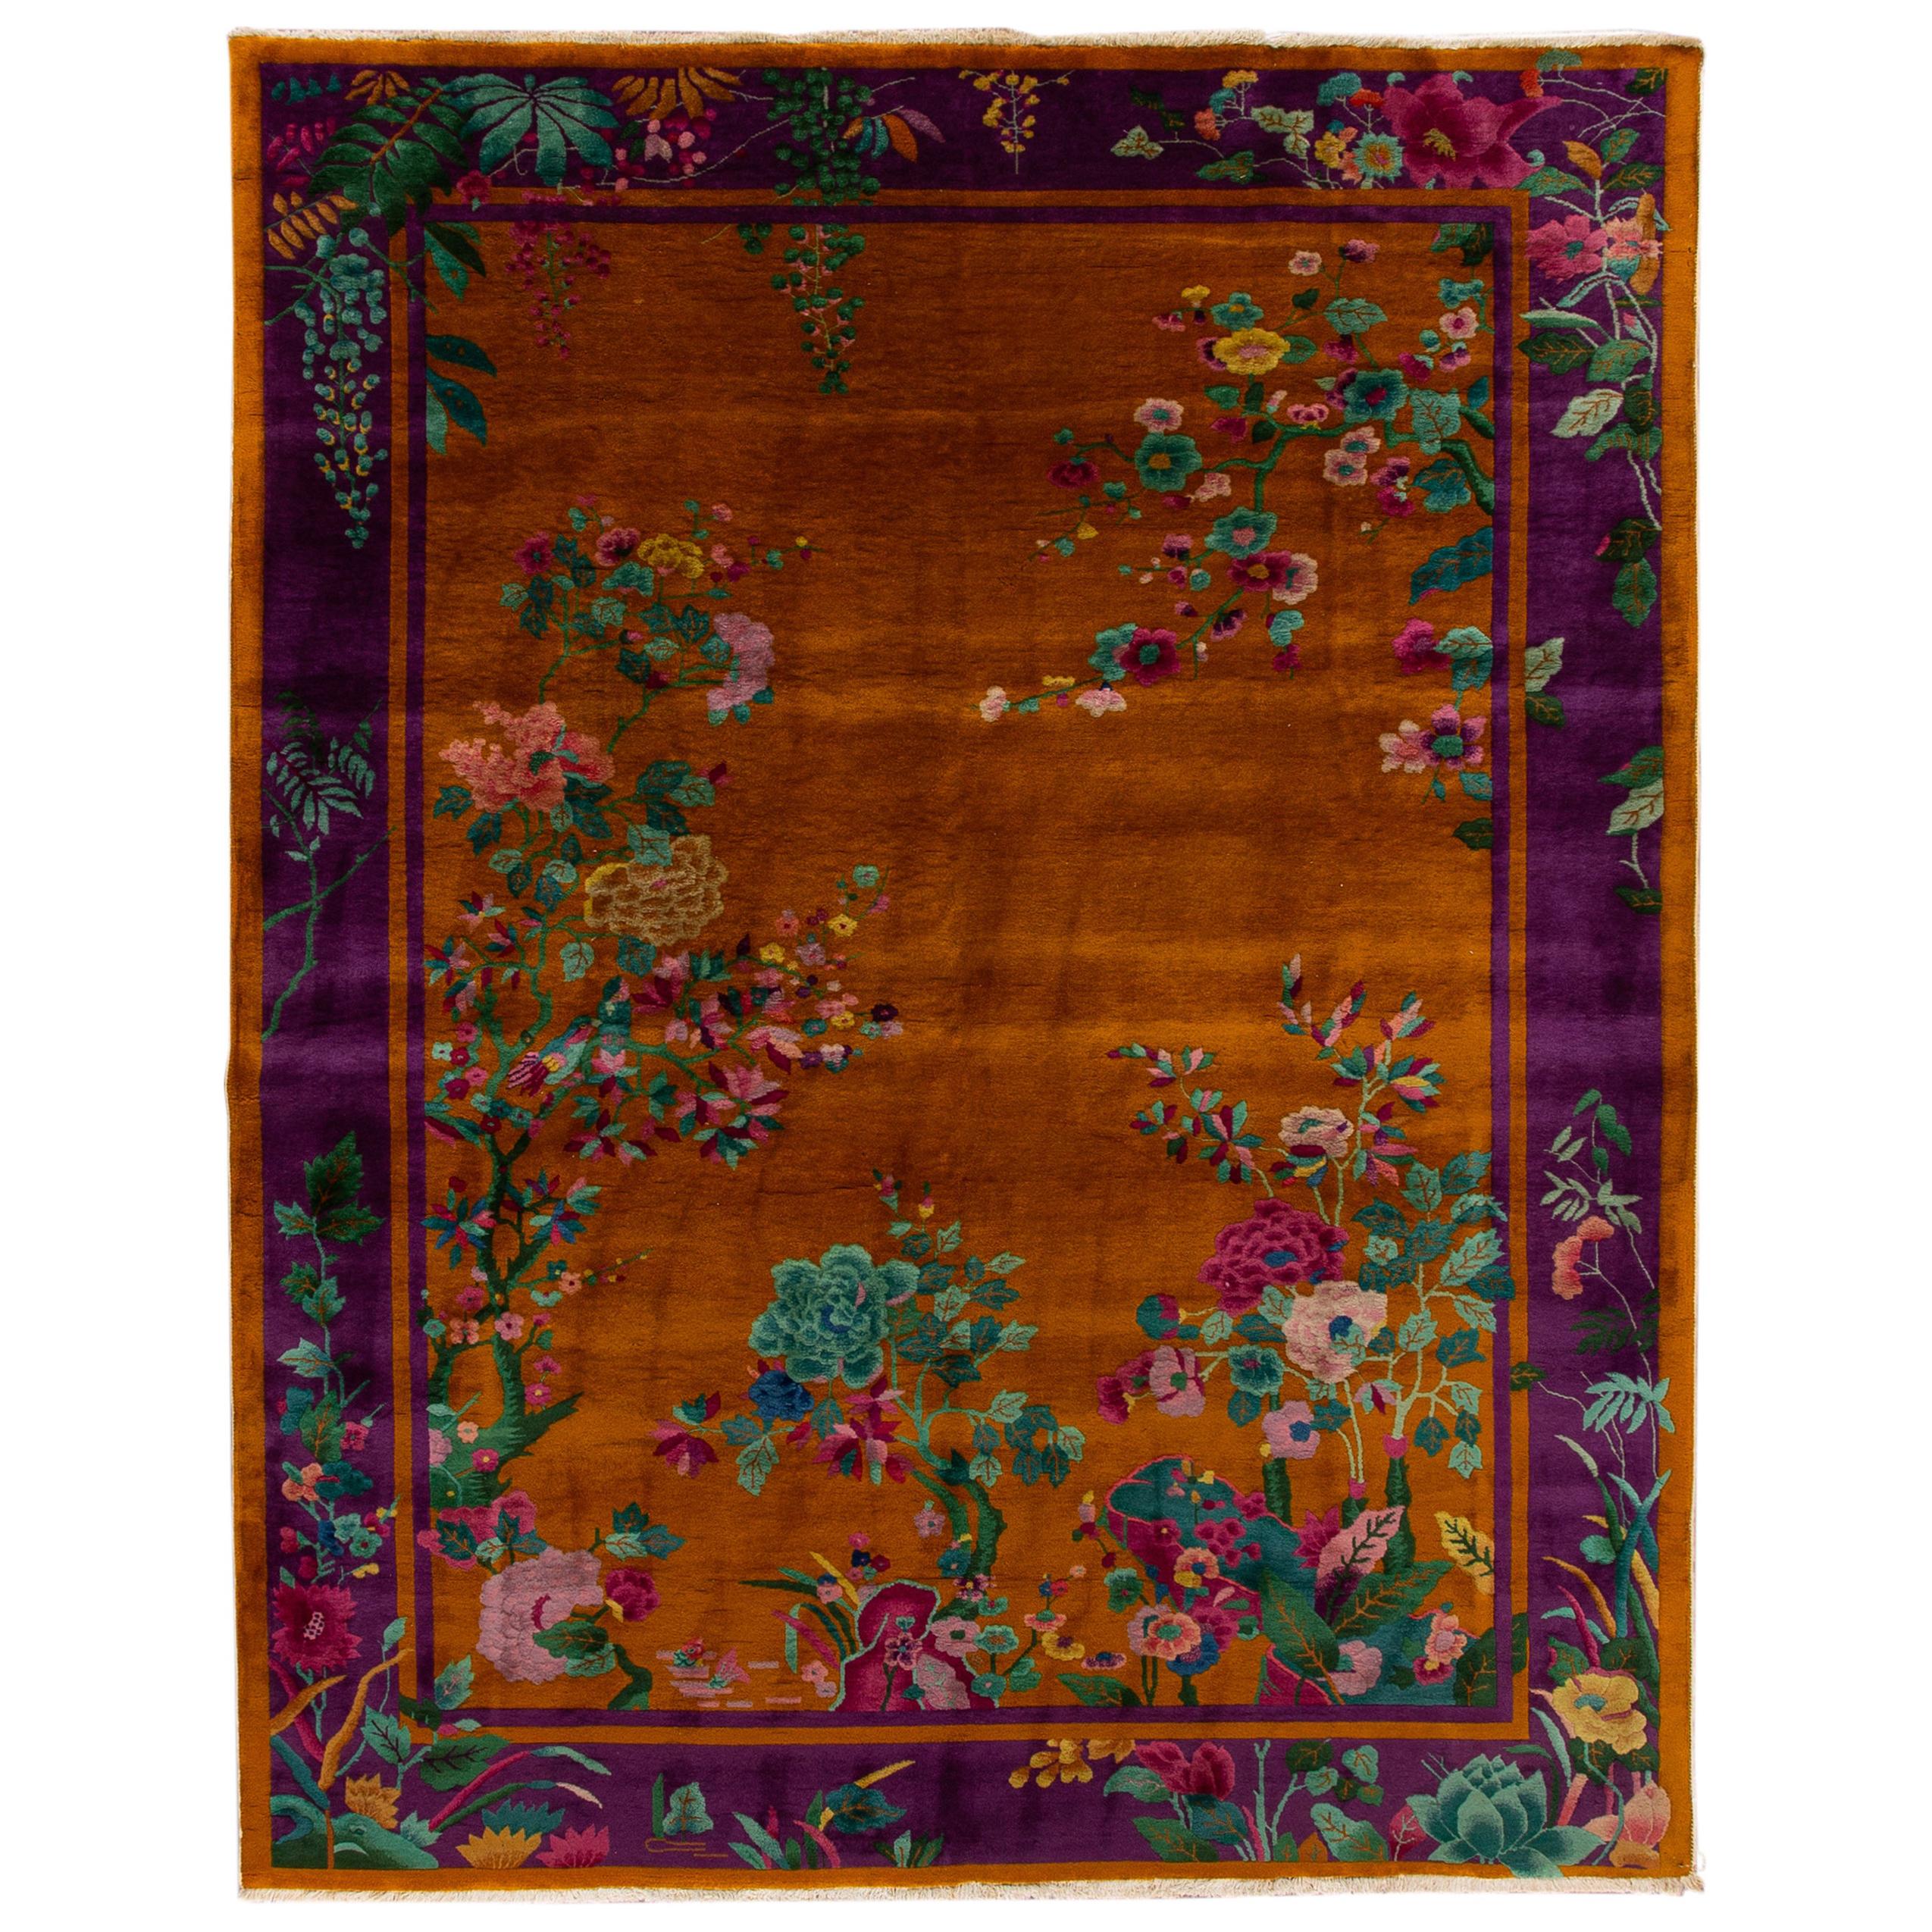 Antique Art Deco Orange and Purple Chinese Handmade Floral Wool Rug